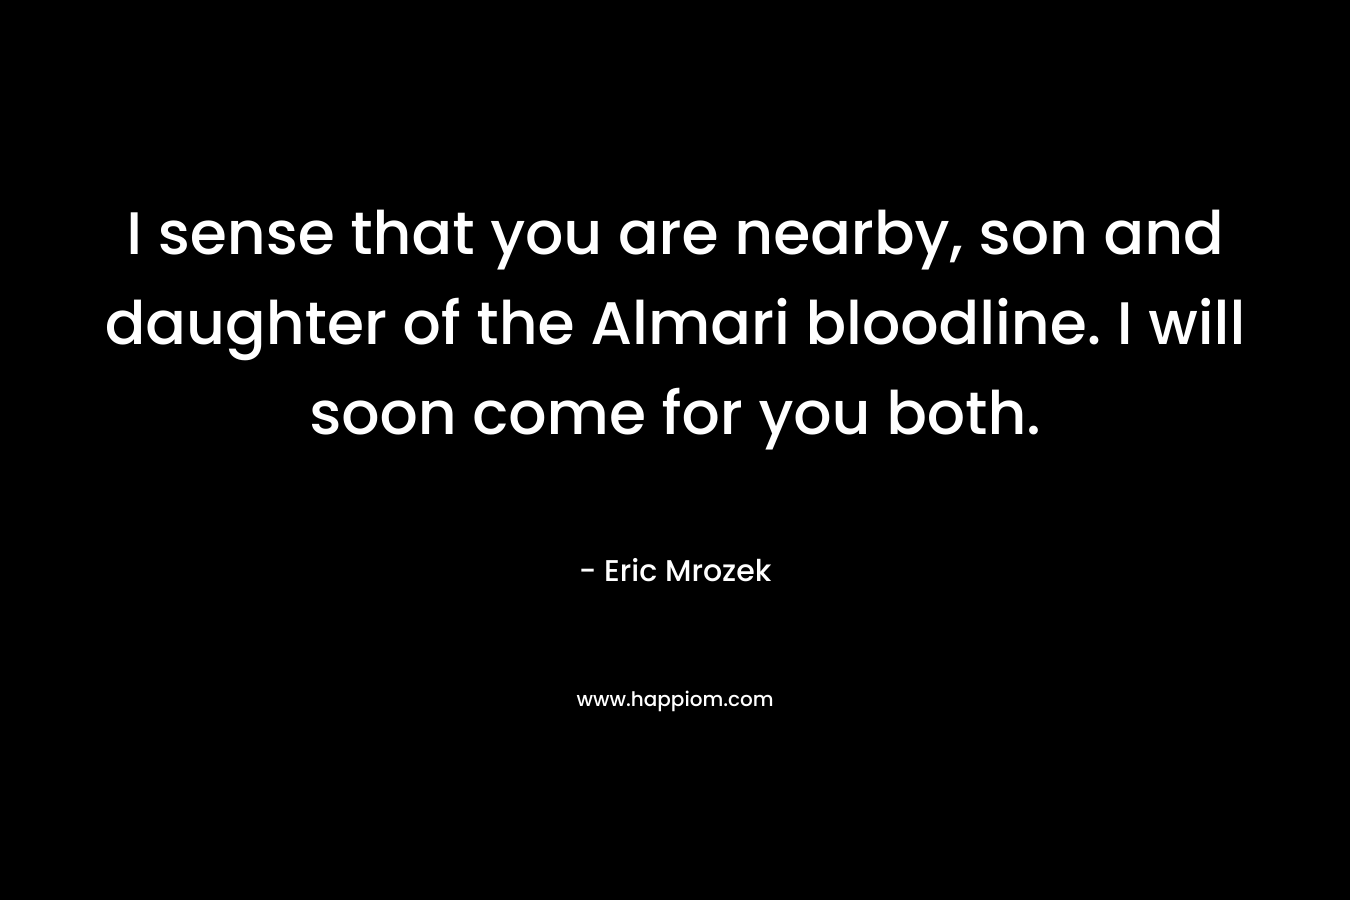 I sense that you are nearby, son and daughter of the Almari bloodline. I will soon come for you both. – Eric Mrozek